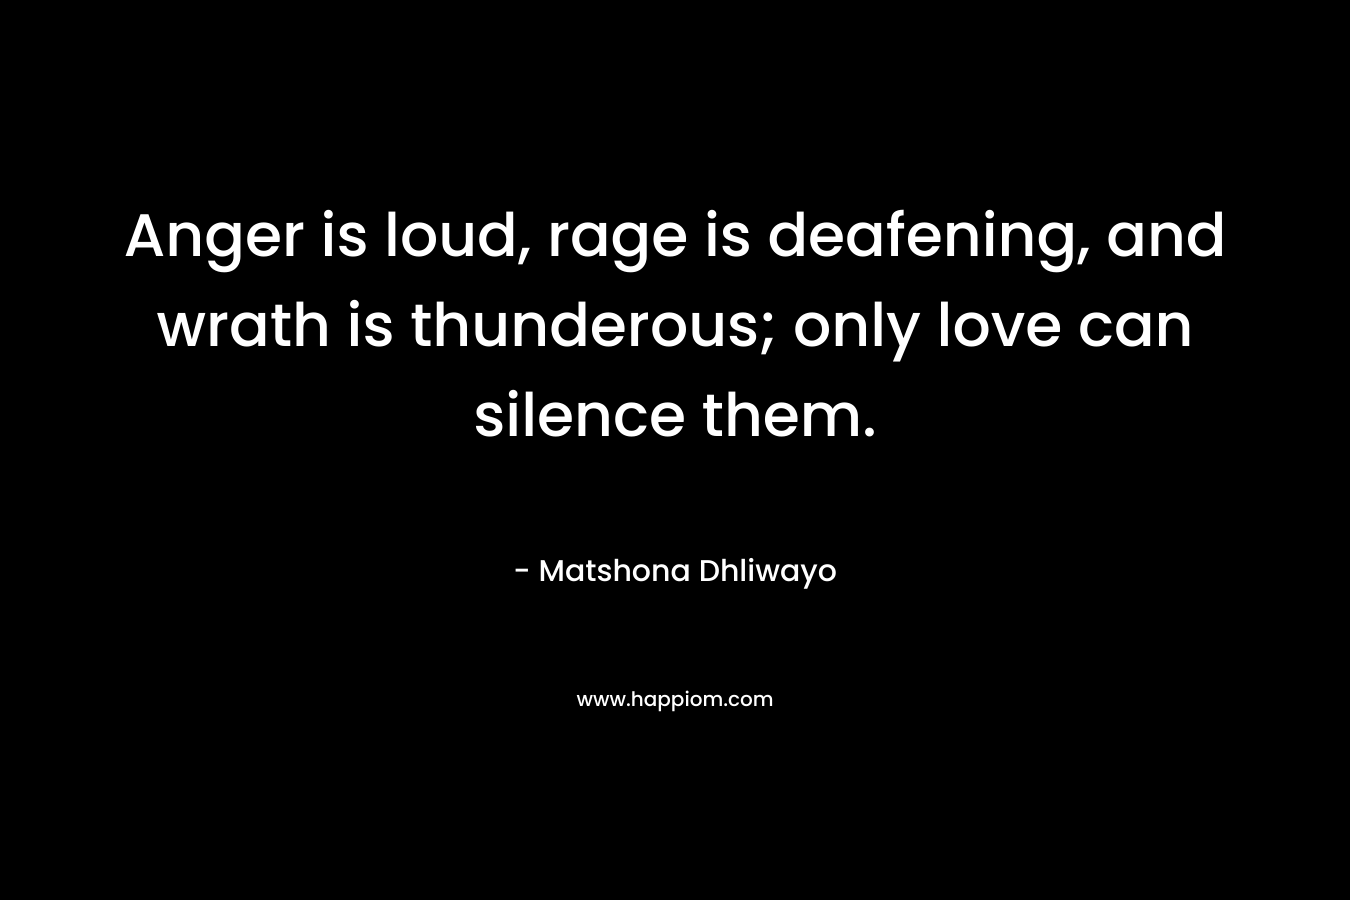 Anger is loud, rage is deafening, and wrath is thunderous; only love can silence them.